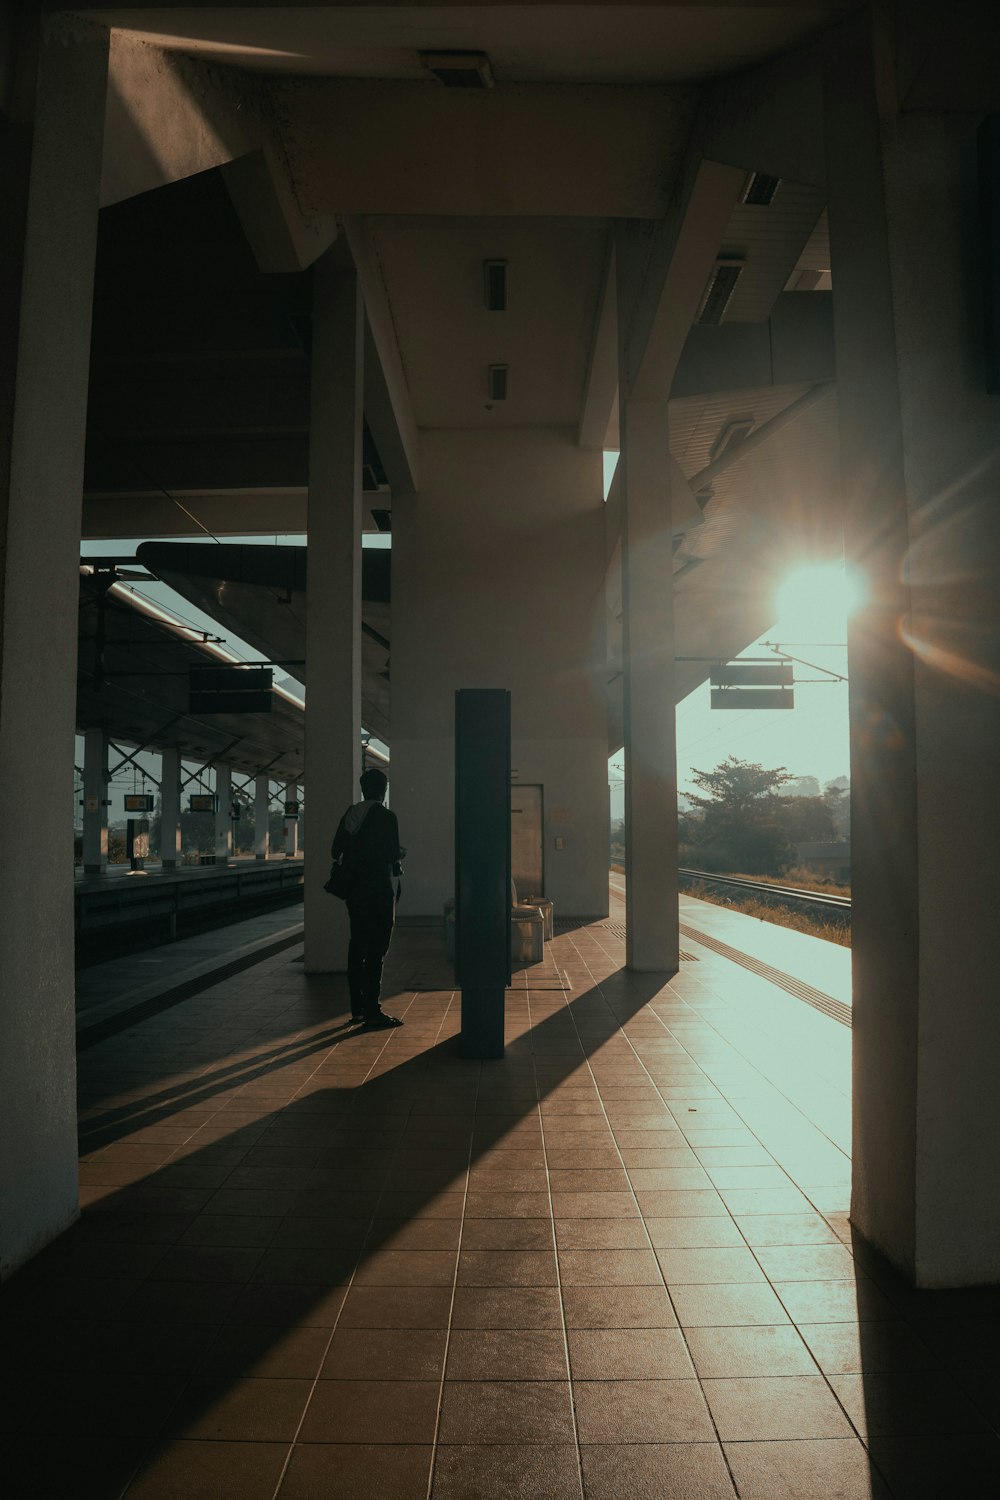 a person standing on a train platform at sunset